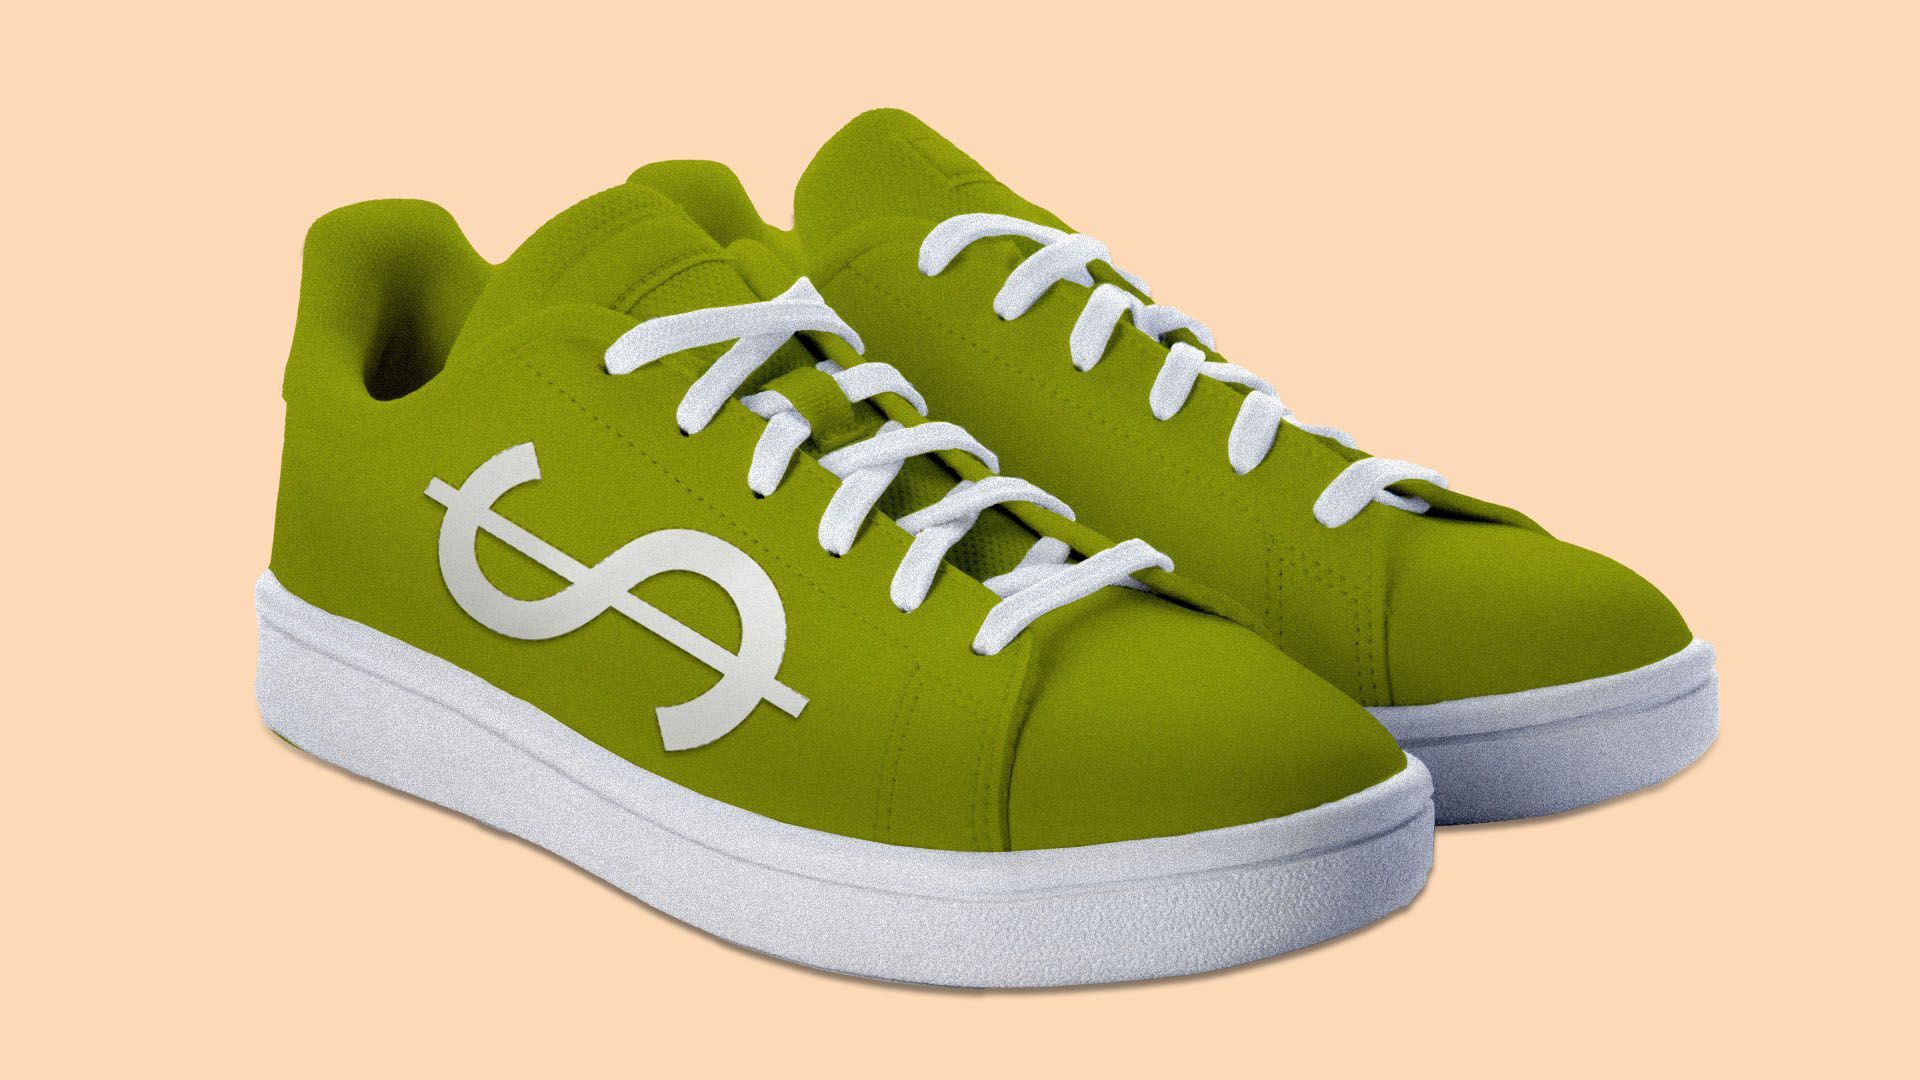 Illustration of a pair of sneakers with a dollar sign insignia 